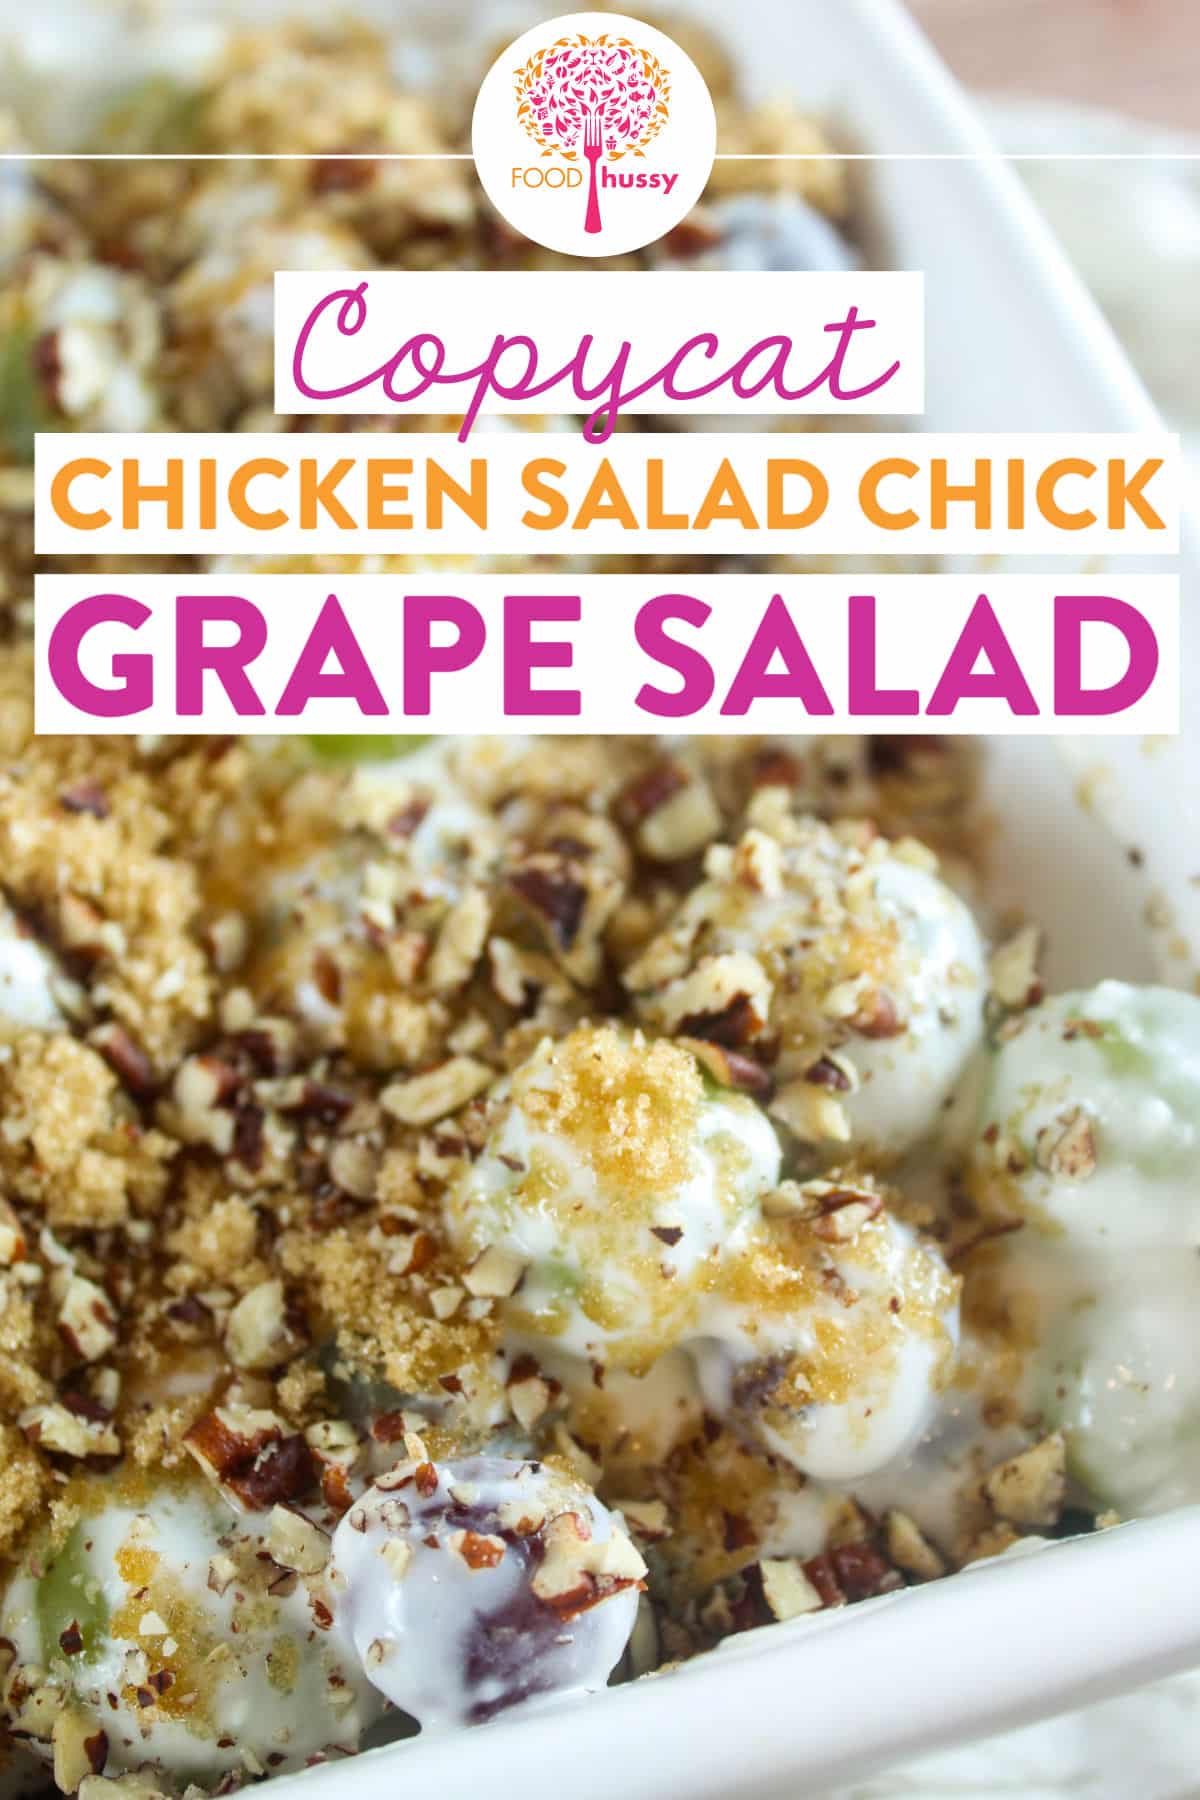 Chicken Salad Chick Grape Salad is the perfect potluck dessert! It's fruity and refreshing with a little crunch and a little sweet! A dish everyone will love! via @foodhussy